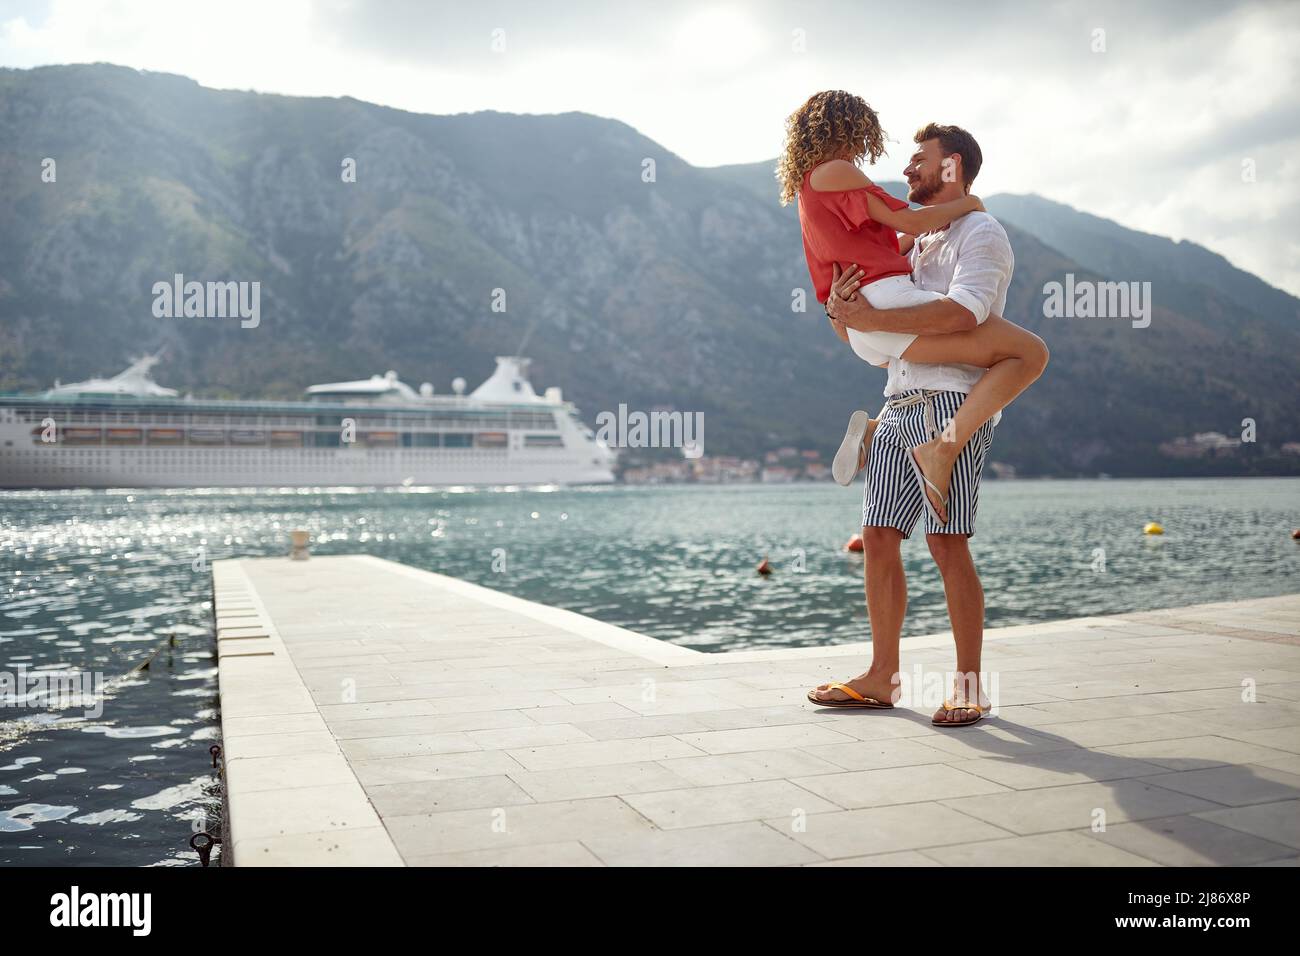 Man holding woman in his arms standing on pier. Cruiser and mountains in background. Togetherness, lifestyle, love, holiday concept. Stock Photo